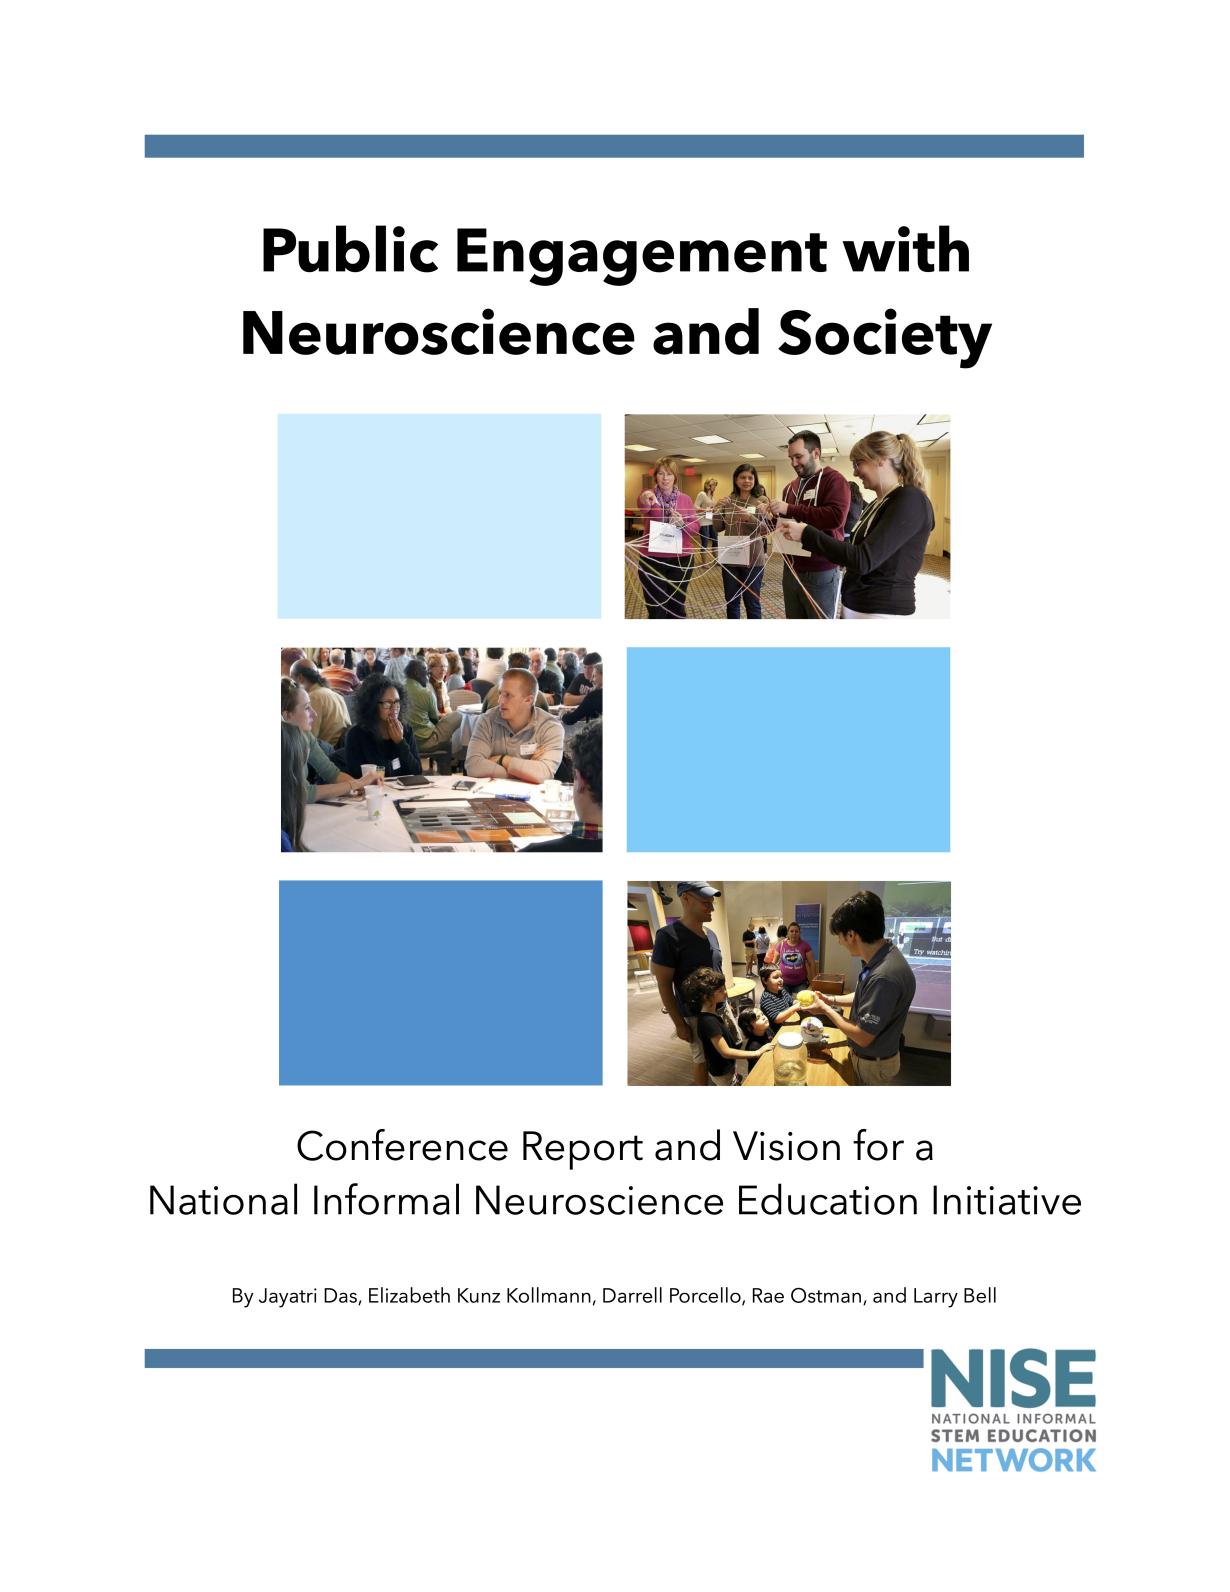 Das et al 2018 Public Engagement with Neuroscience and SocietyConference Report and Vision for a National Informal Neuroscience Education Cover Page